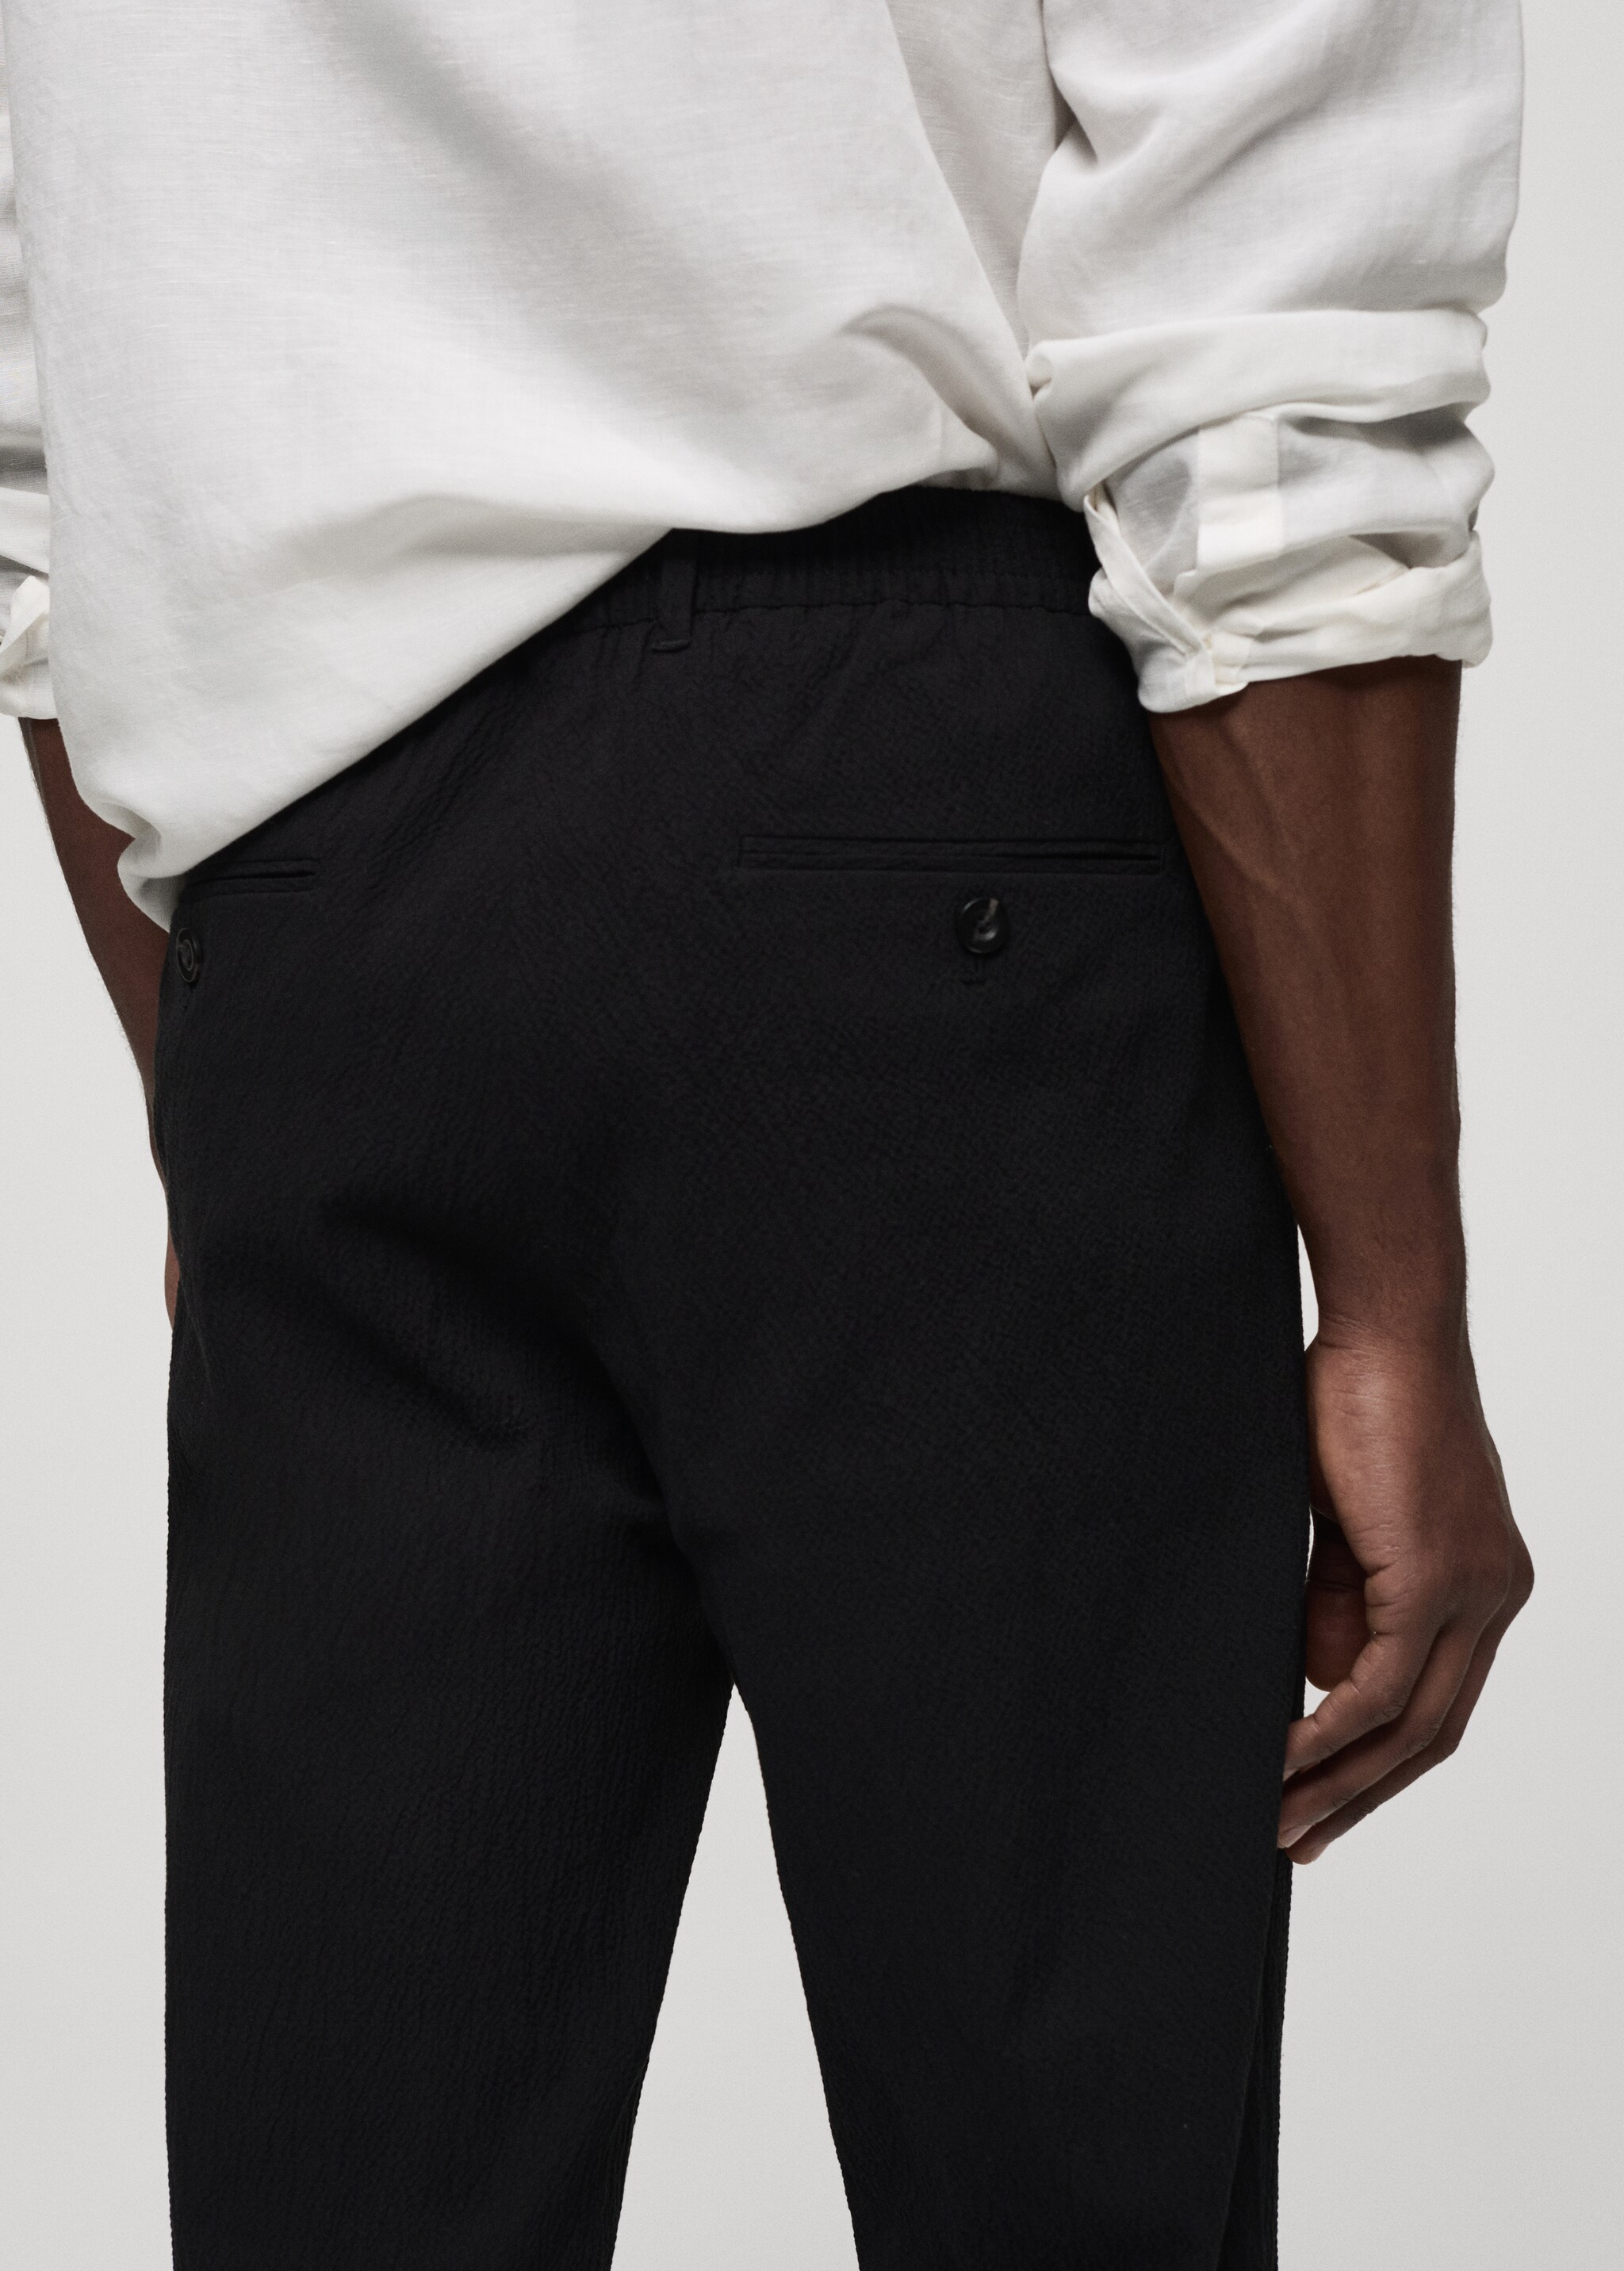 Seersucker cotton trousers - Details of the article 4